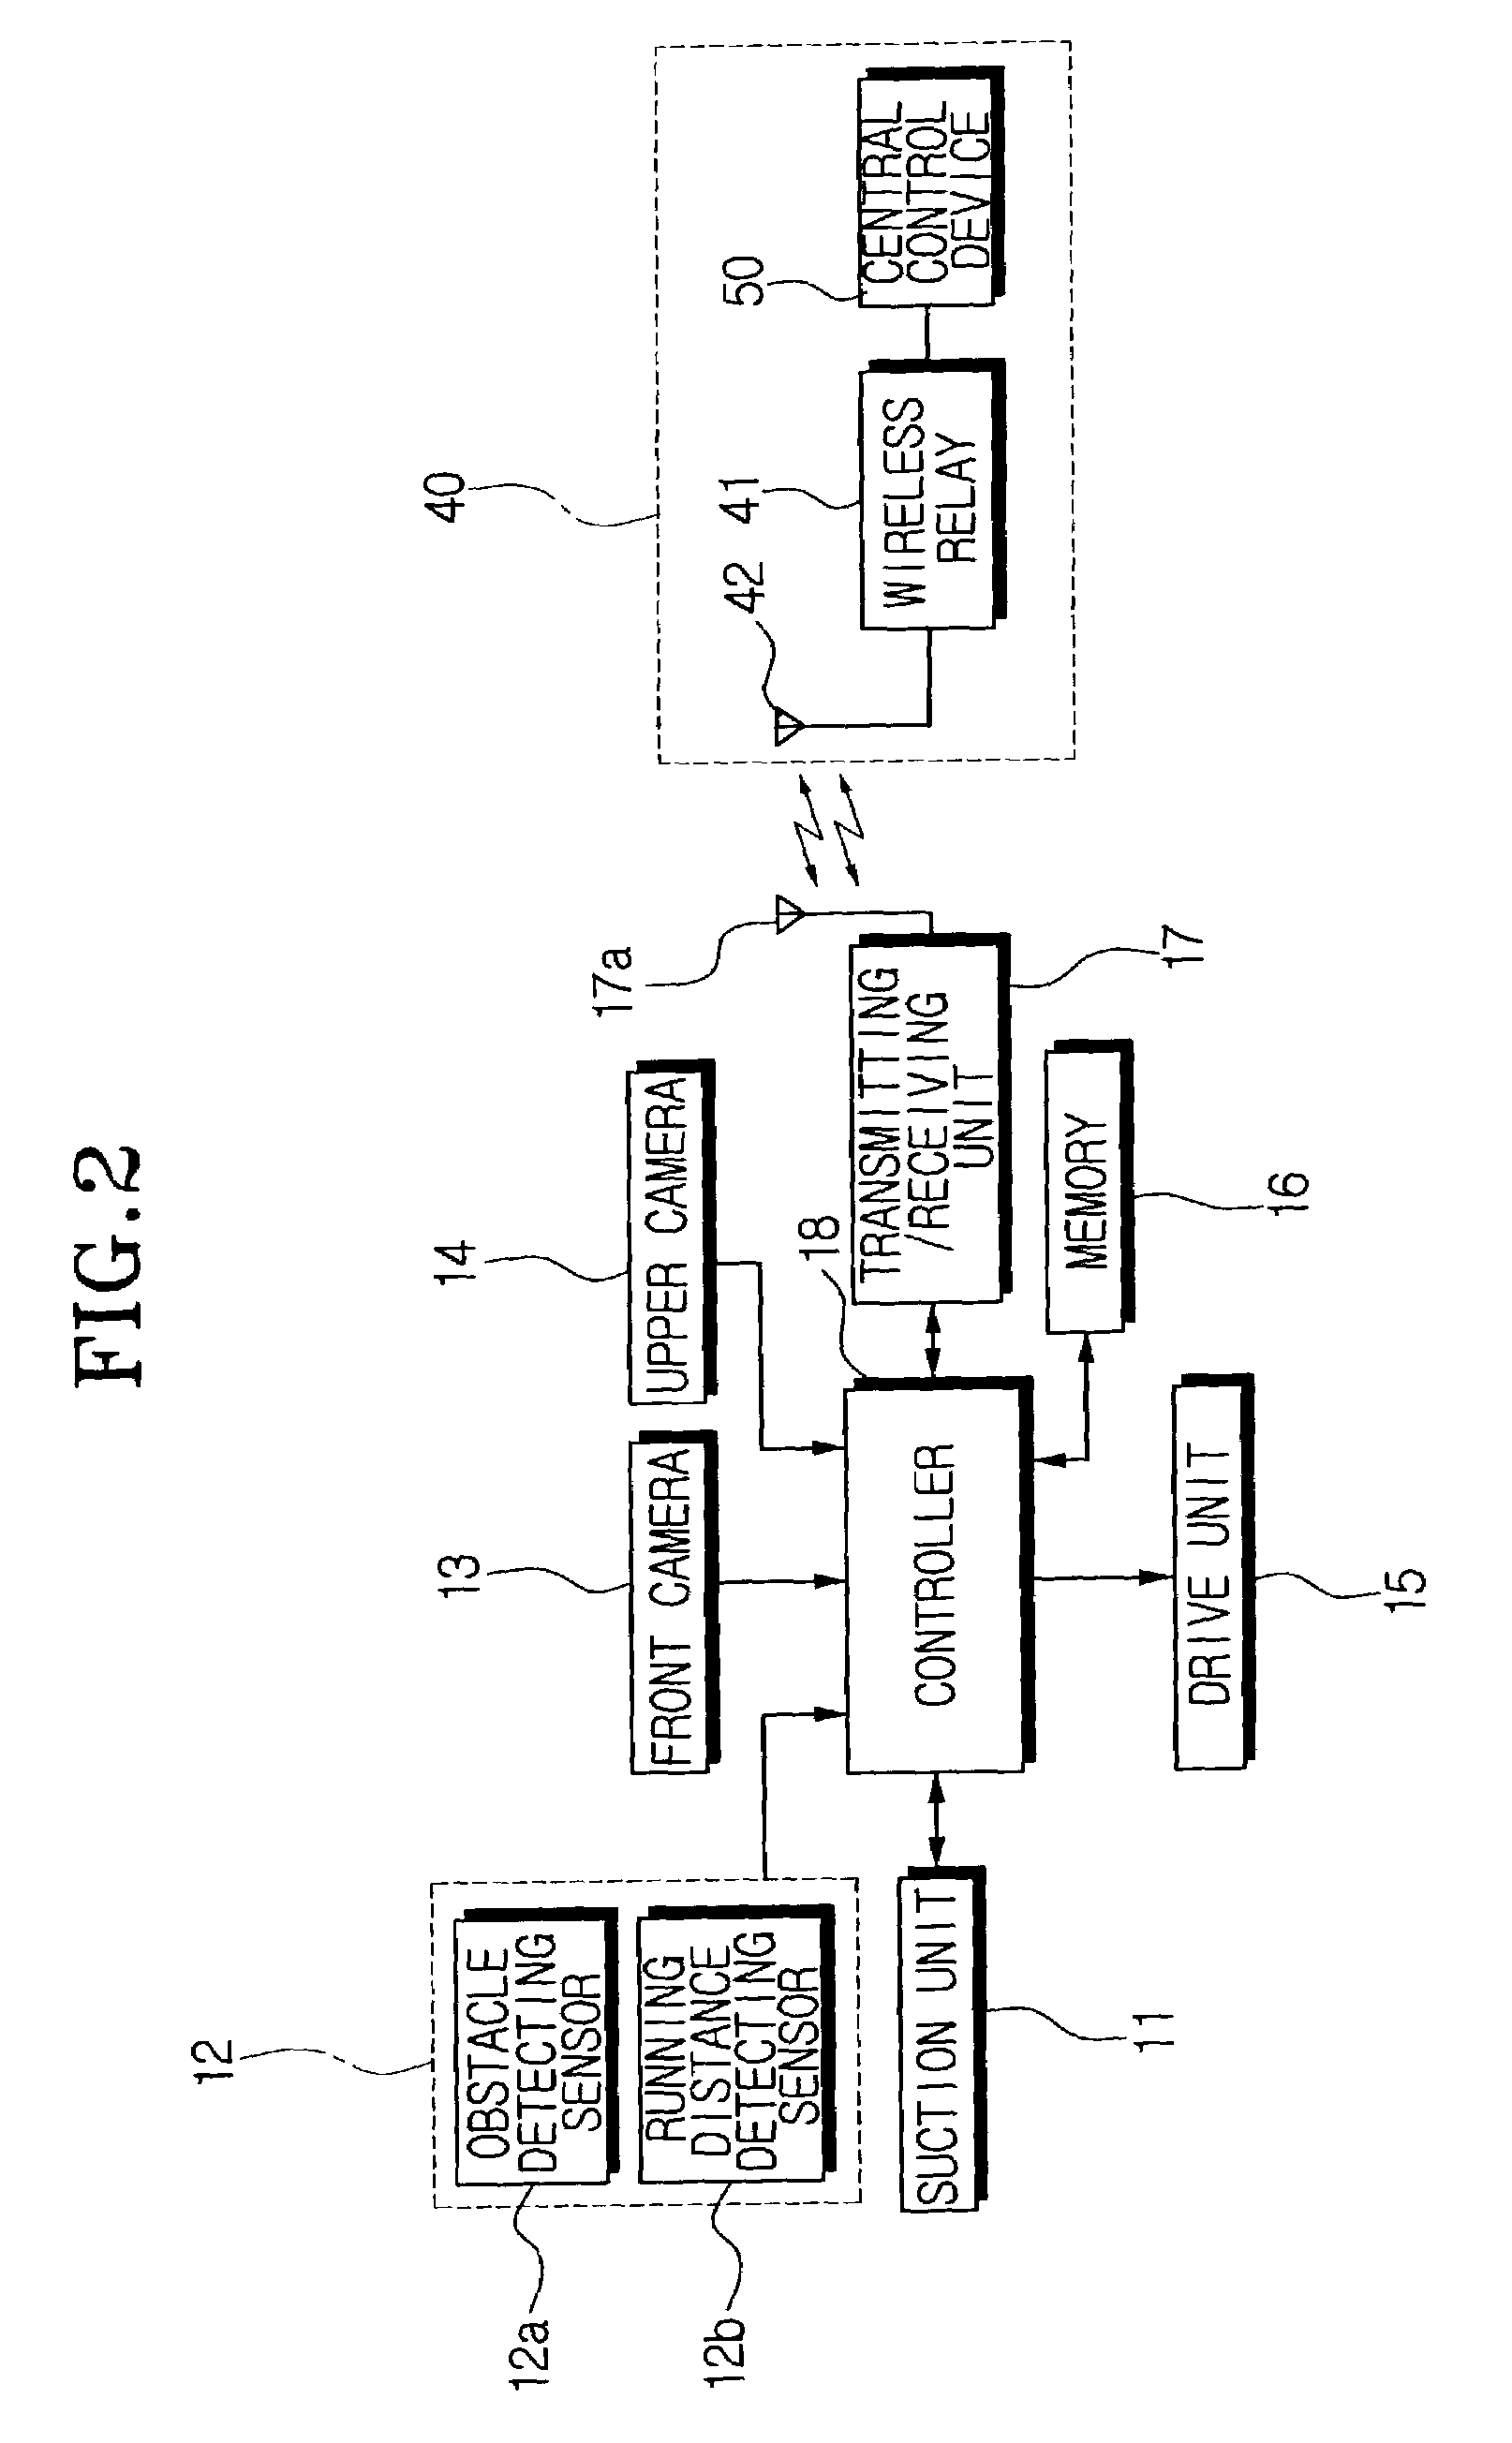 Robot cleaner, robot cleaning system and method of controlling same